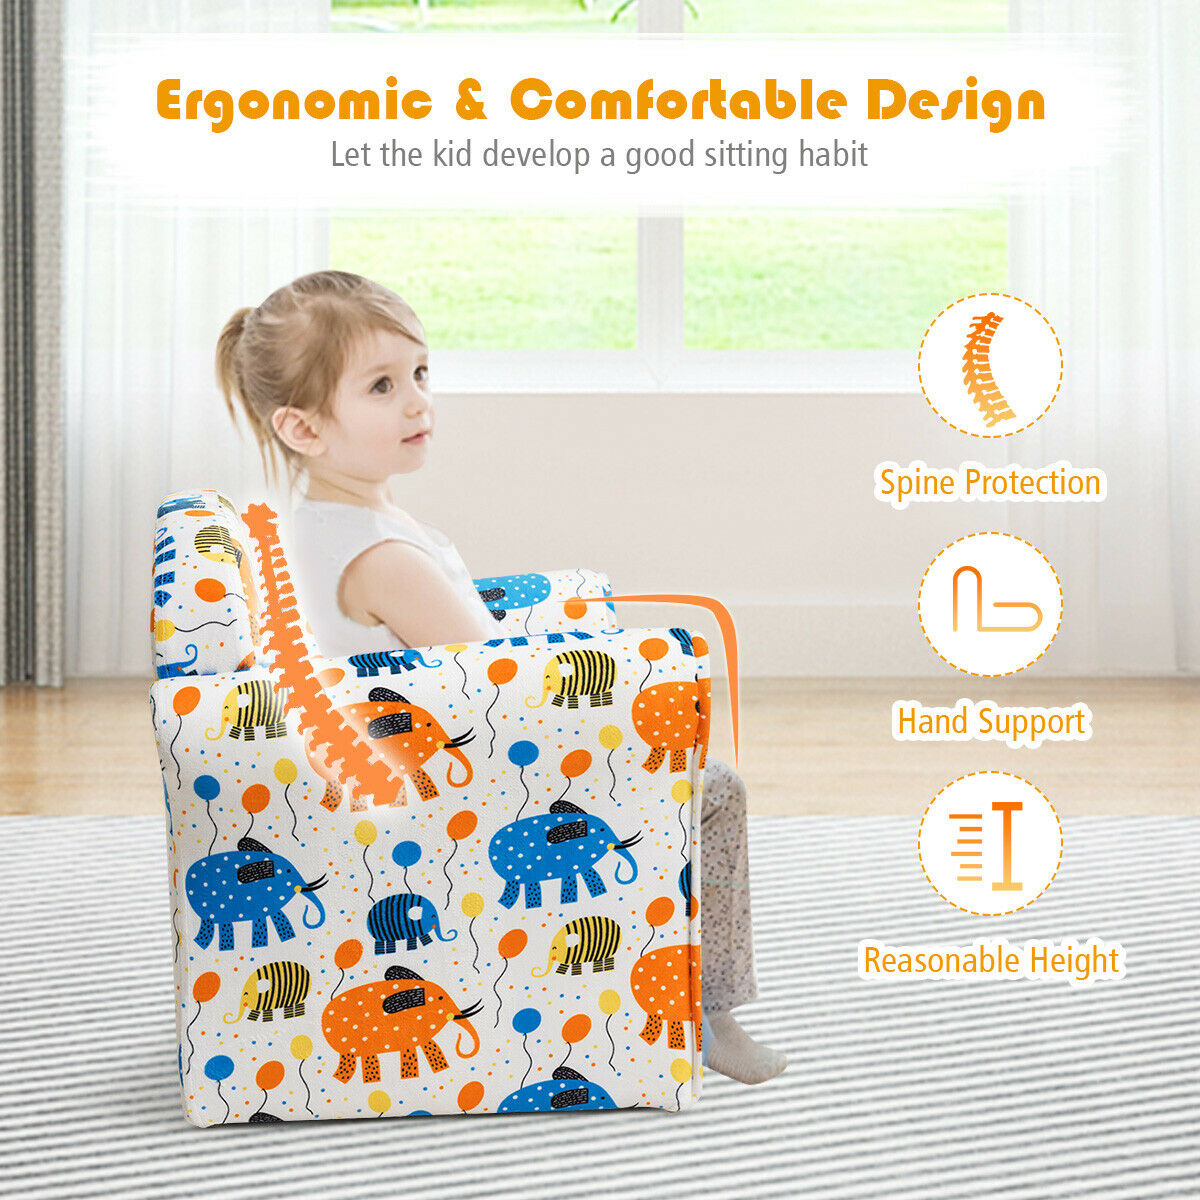 kids elephant couch